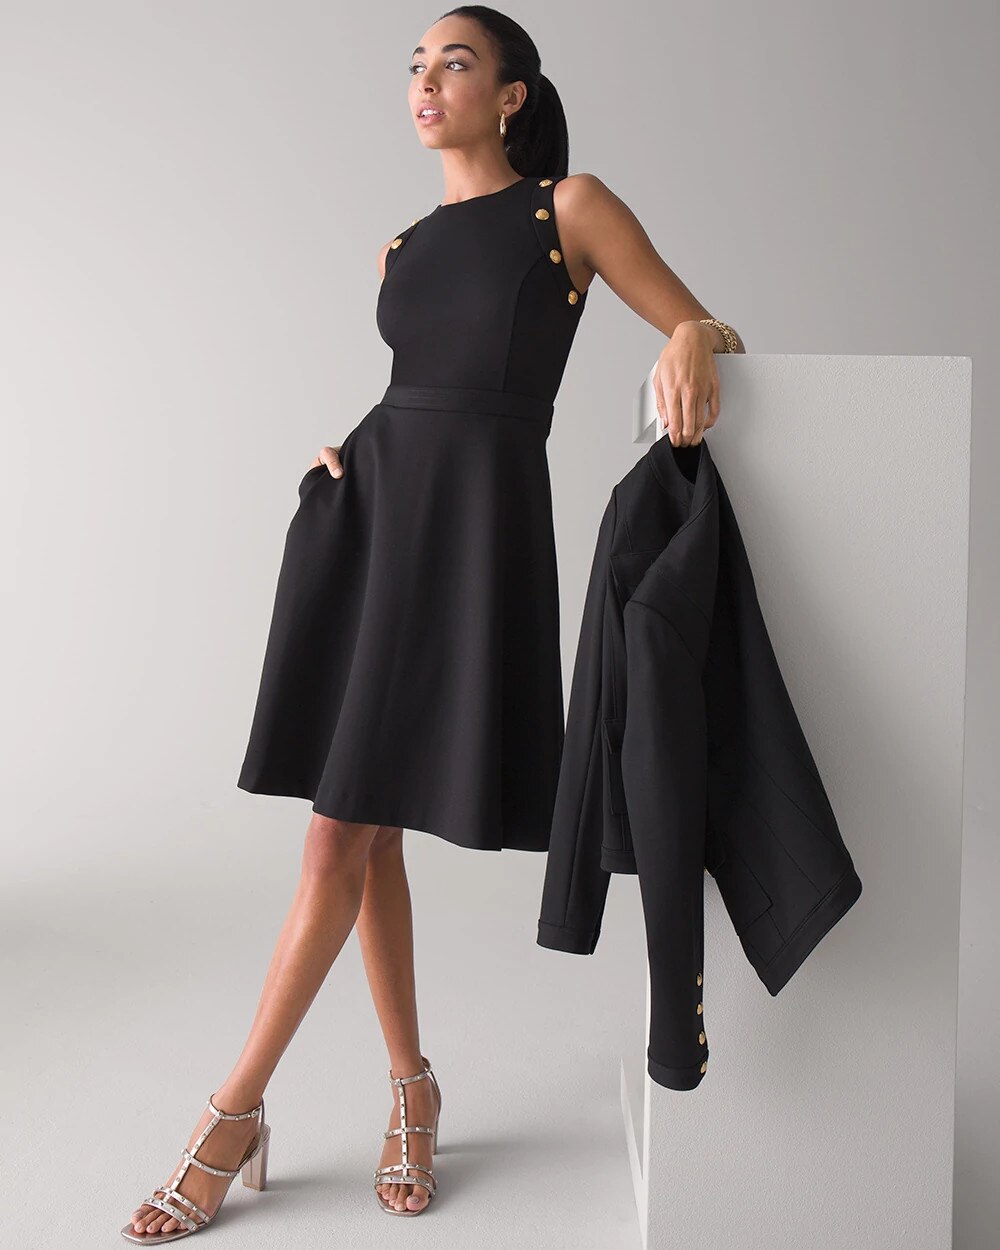 black fit and flare dress